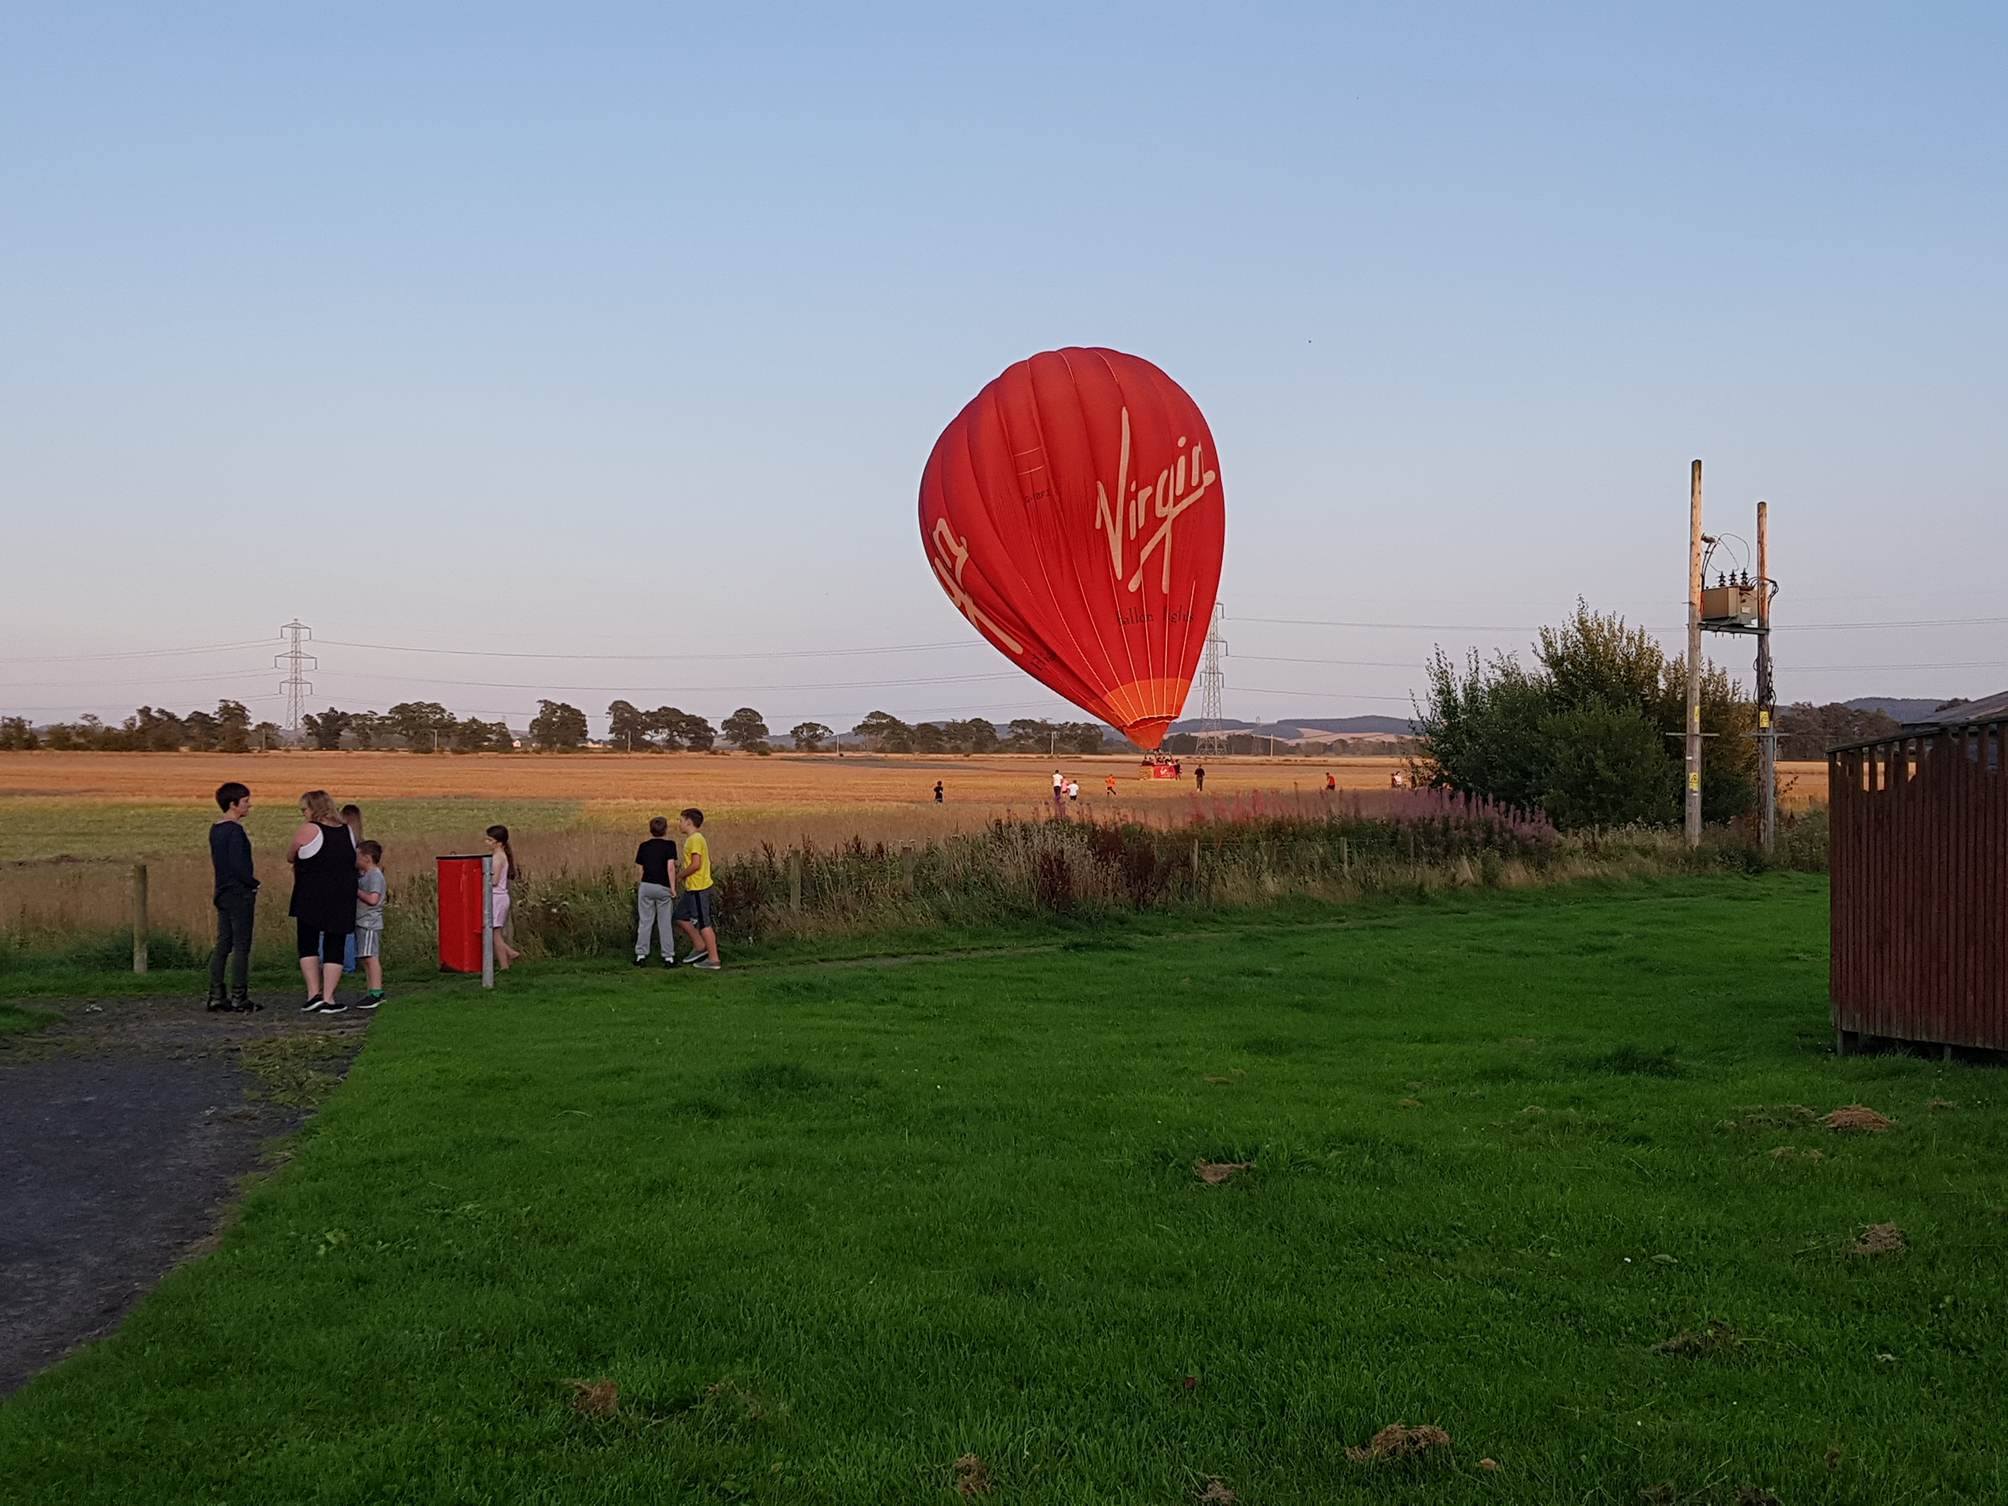 The hot air balloon landed in a field in Inchture.